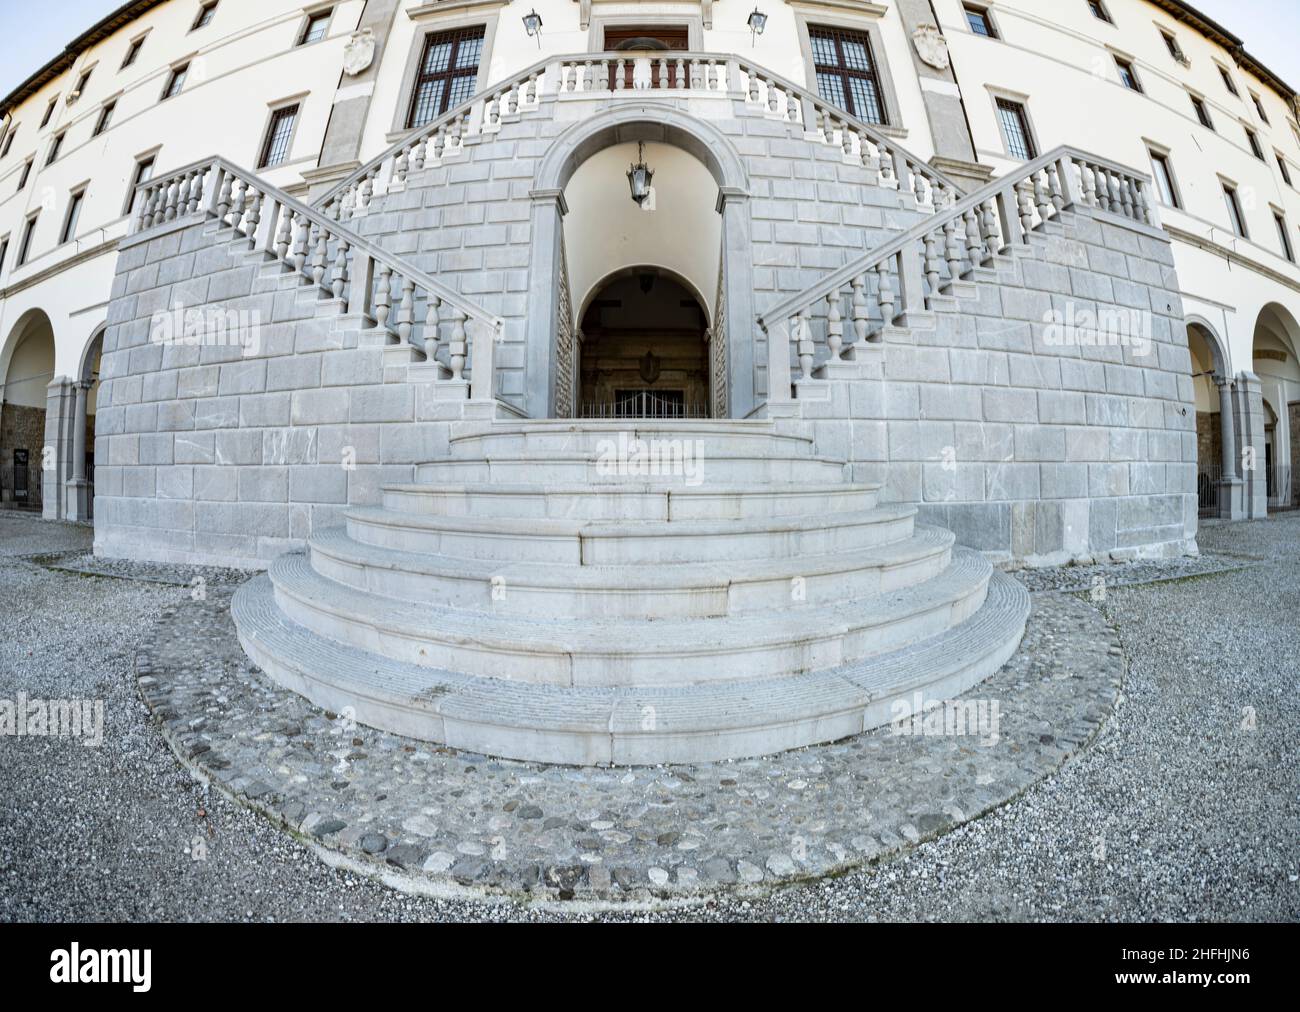 Udine, Italy. January 2022.  panoramic view of the staircase in front of the city castle building Stock Photo